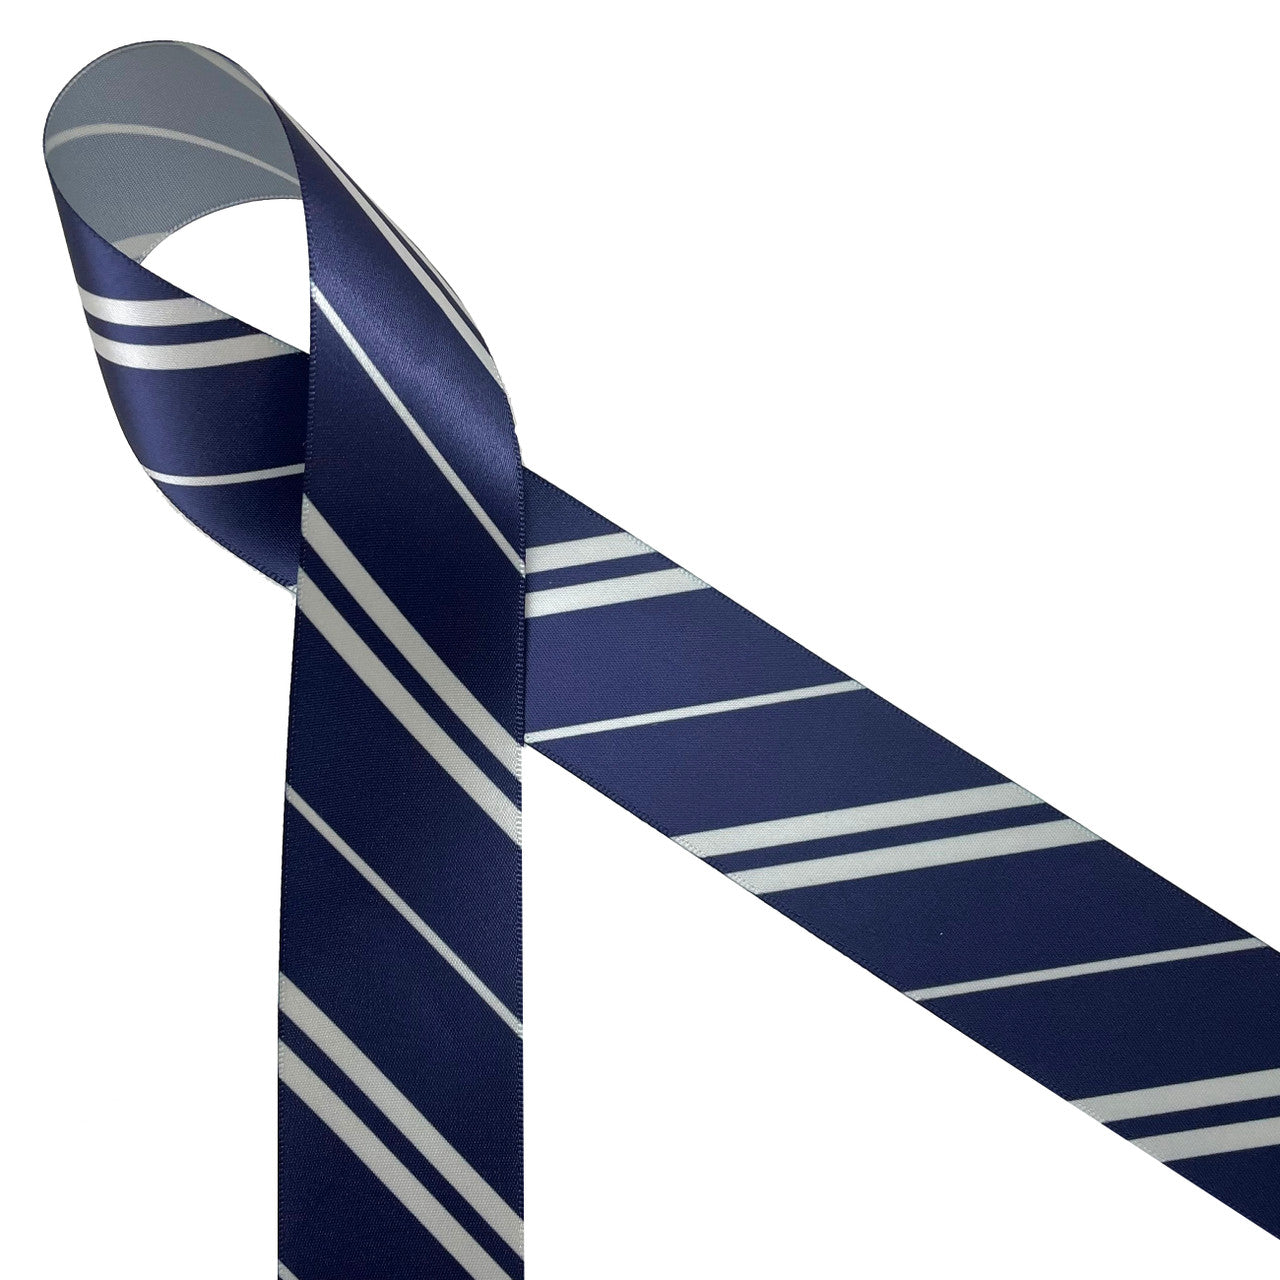 Wide and narrow stripes of gray and navy printed on 1.5 gray single face satin  ribbon, 10 yards